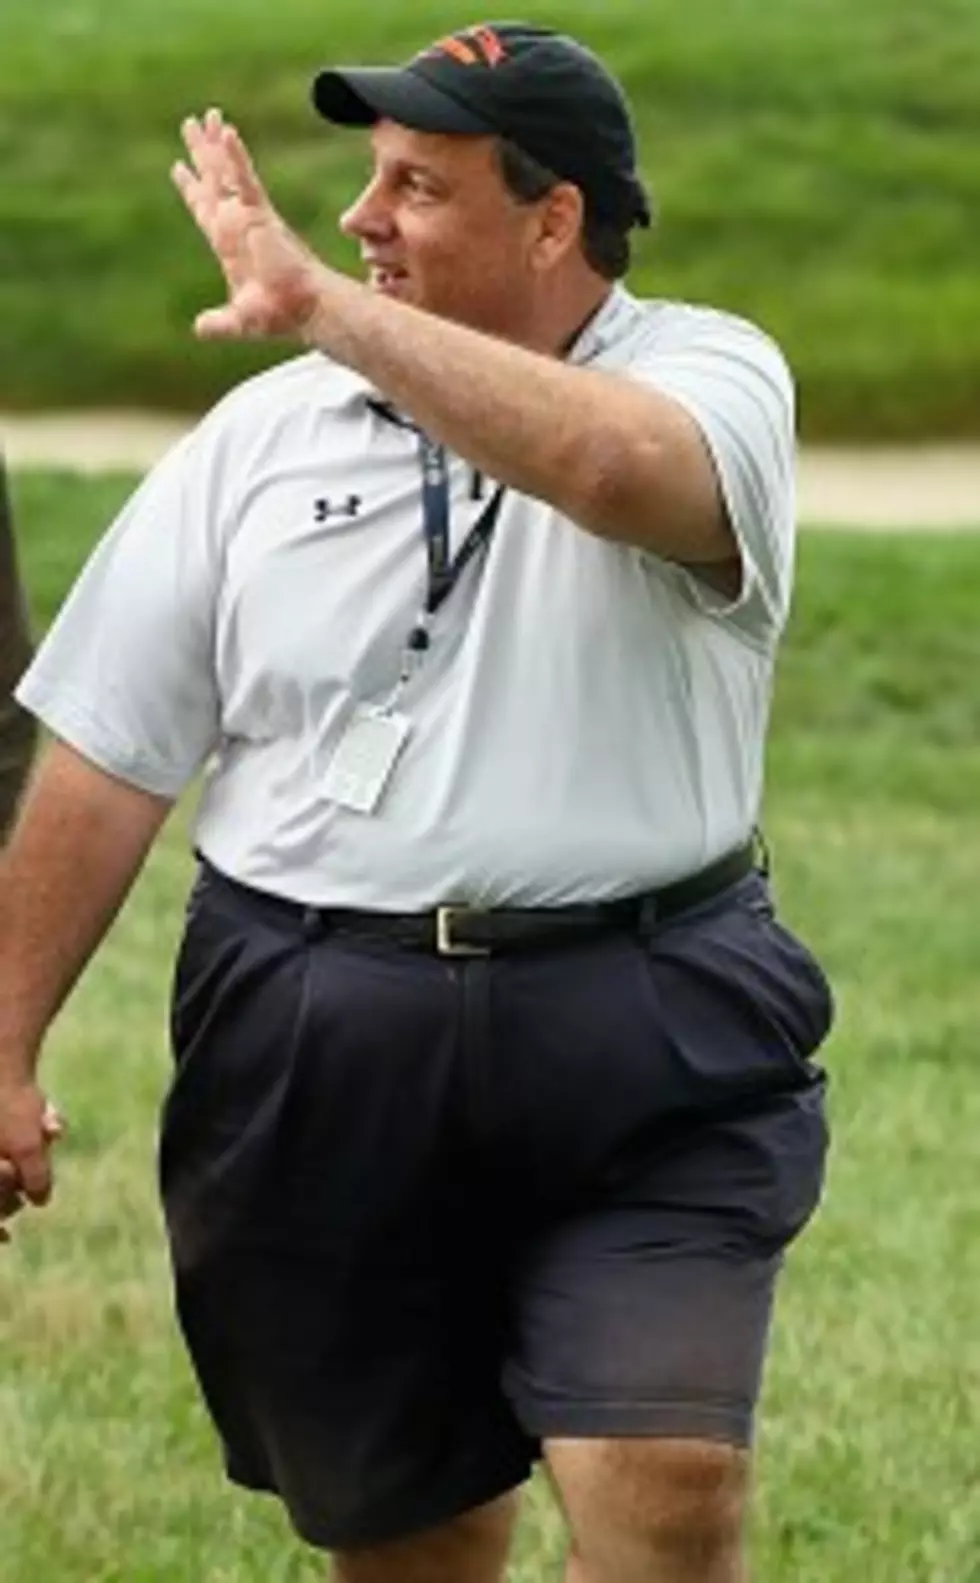 Is Body Shaming Governor Christie Fair Play or Not Okay? [PUBLIC OPINION]